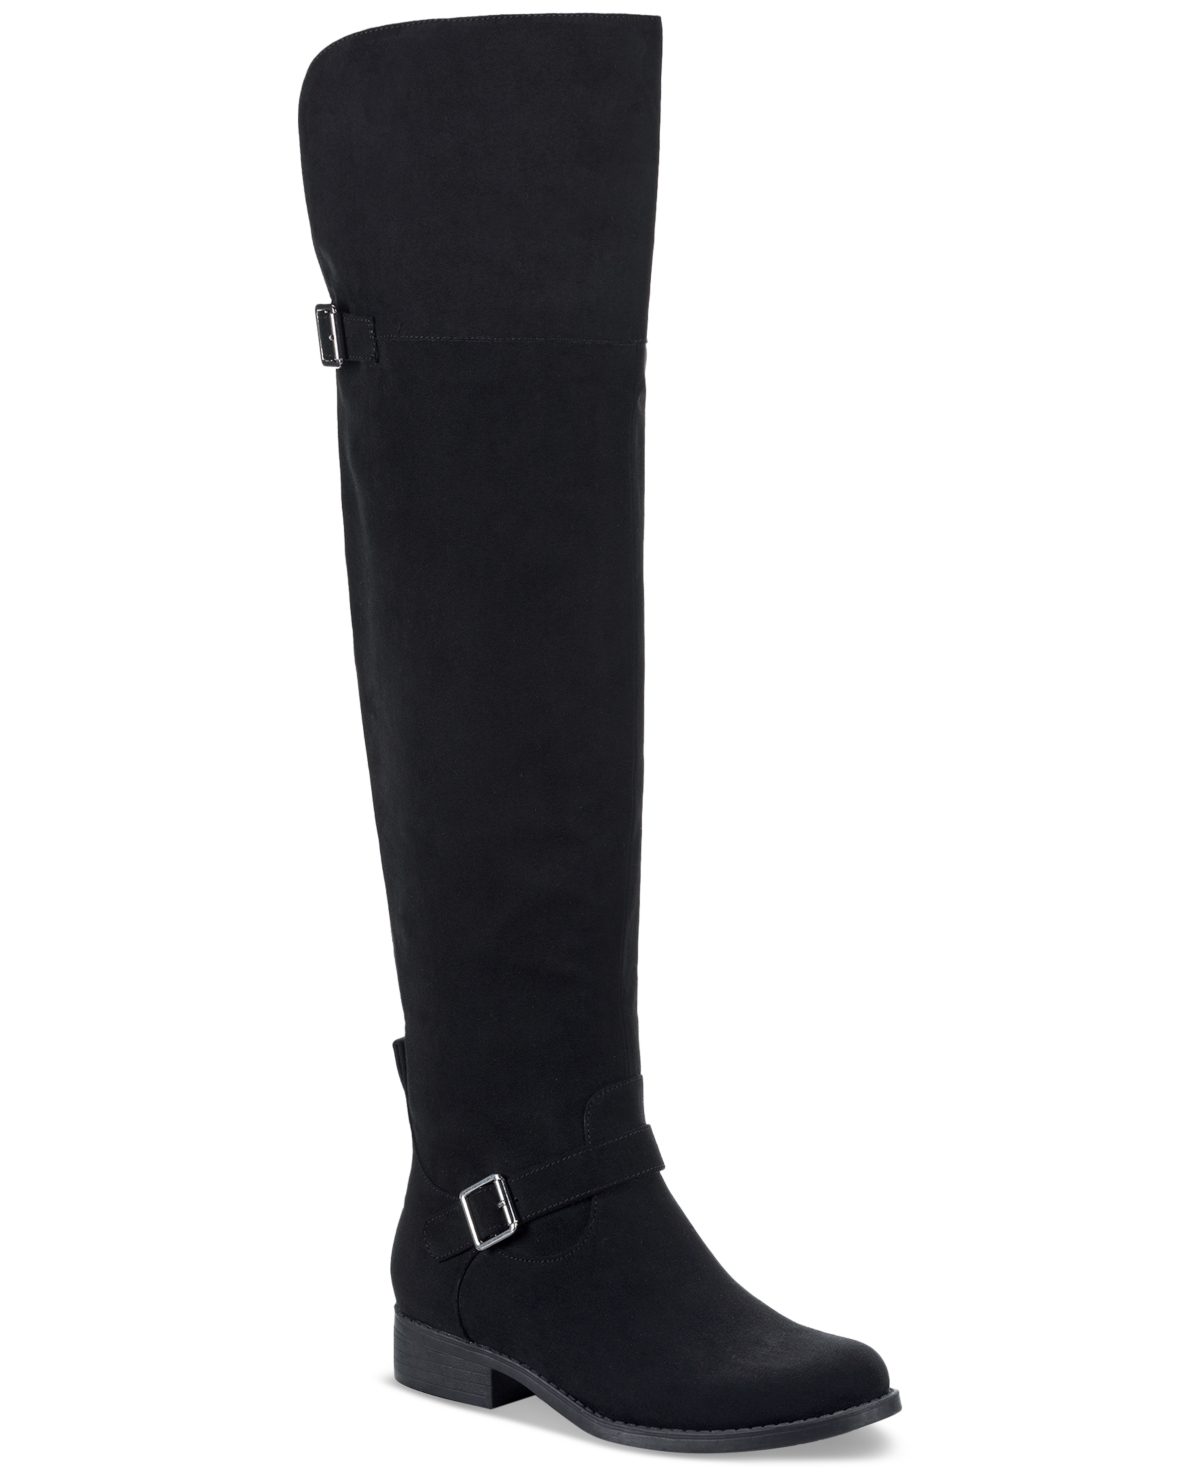 Anyaa Wide-Calf Buckled Over-The-Knee Boots, Created for Macy's - Black